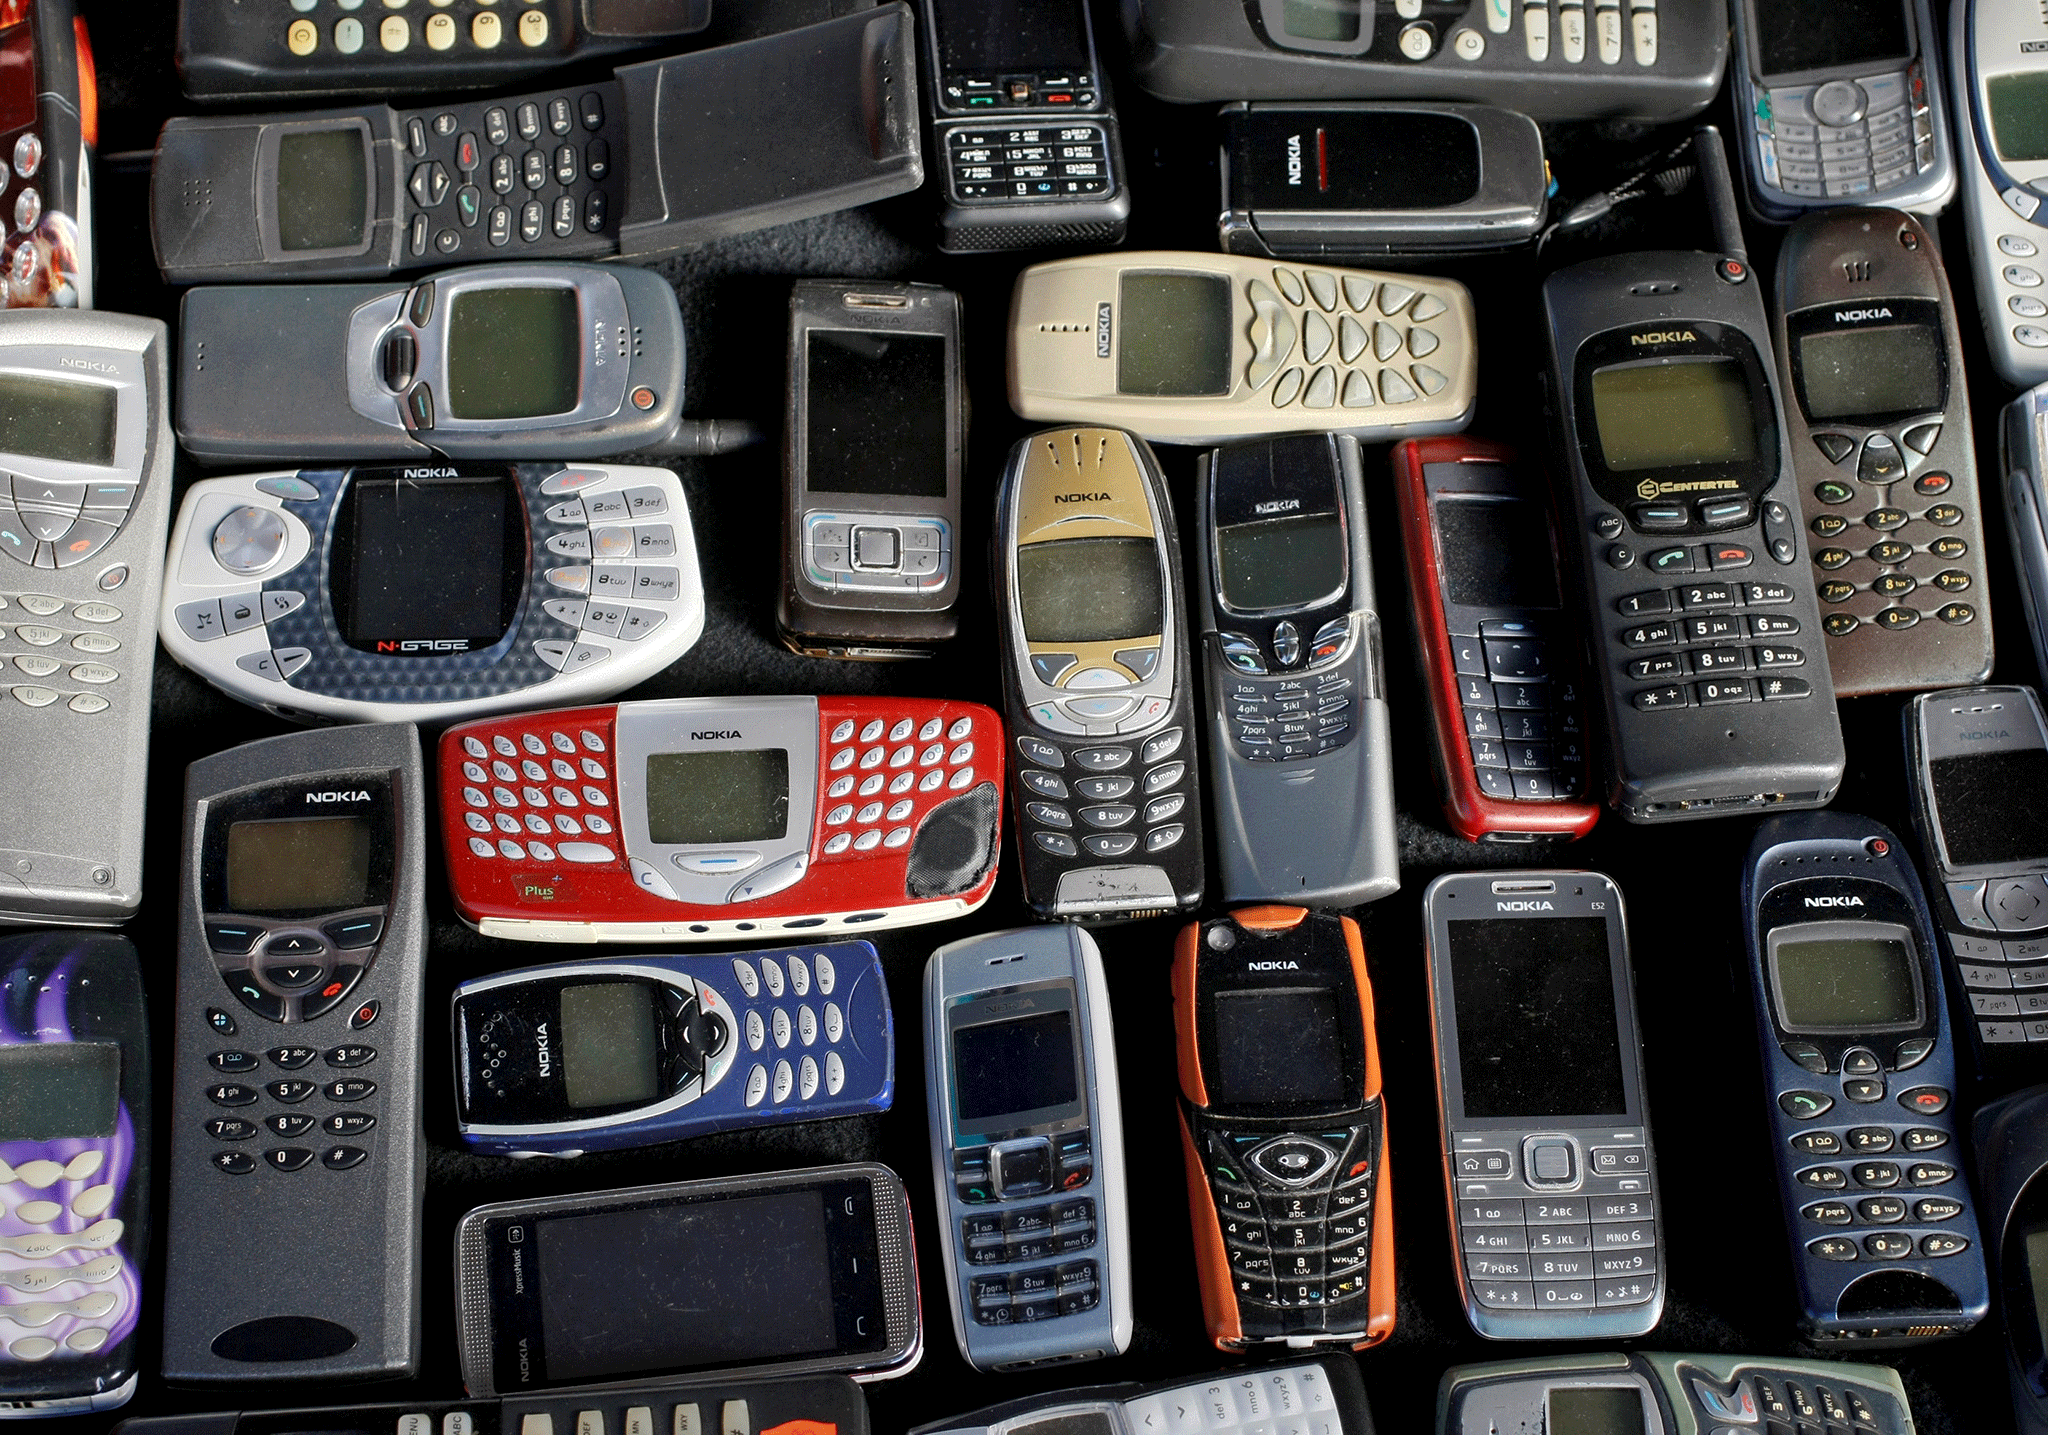 Nokia was once the dominant player in the mobile phone market but failed to adapt to the smartphone revolution